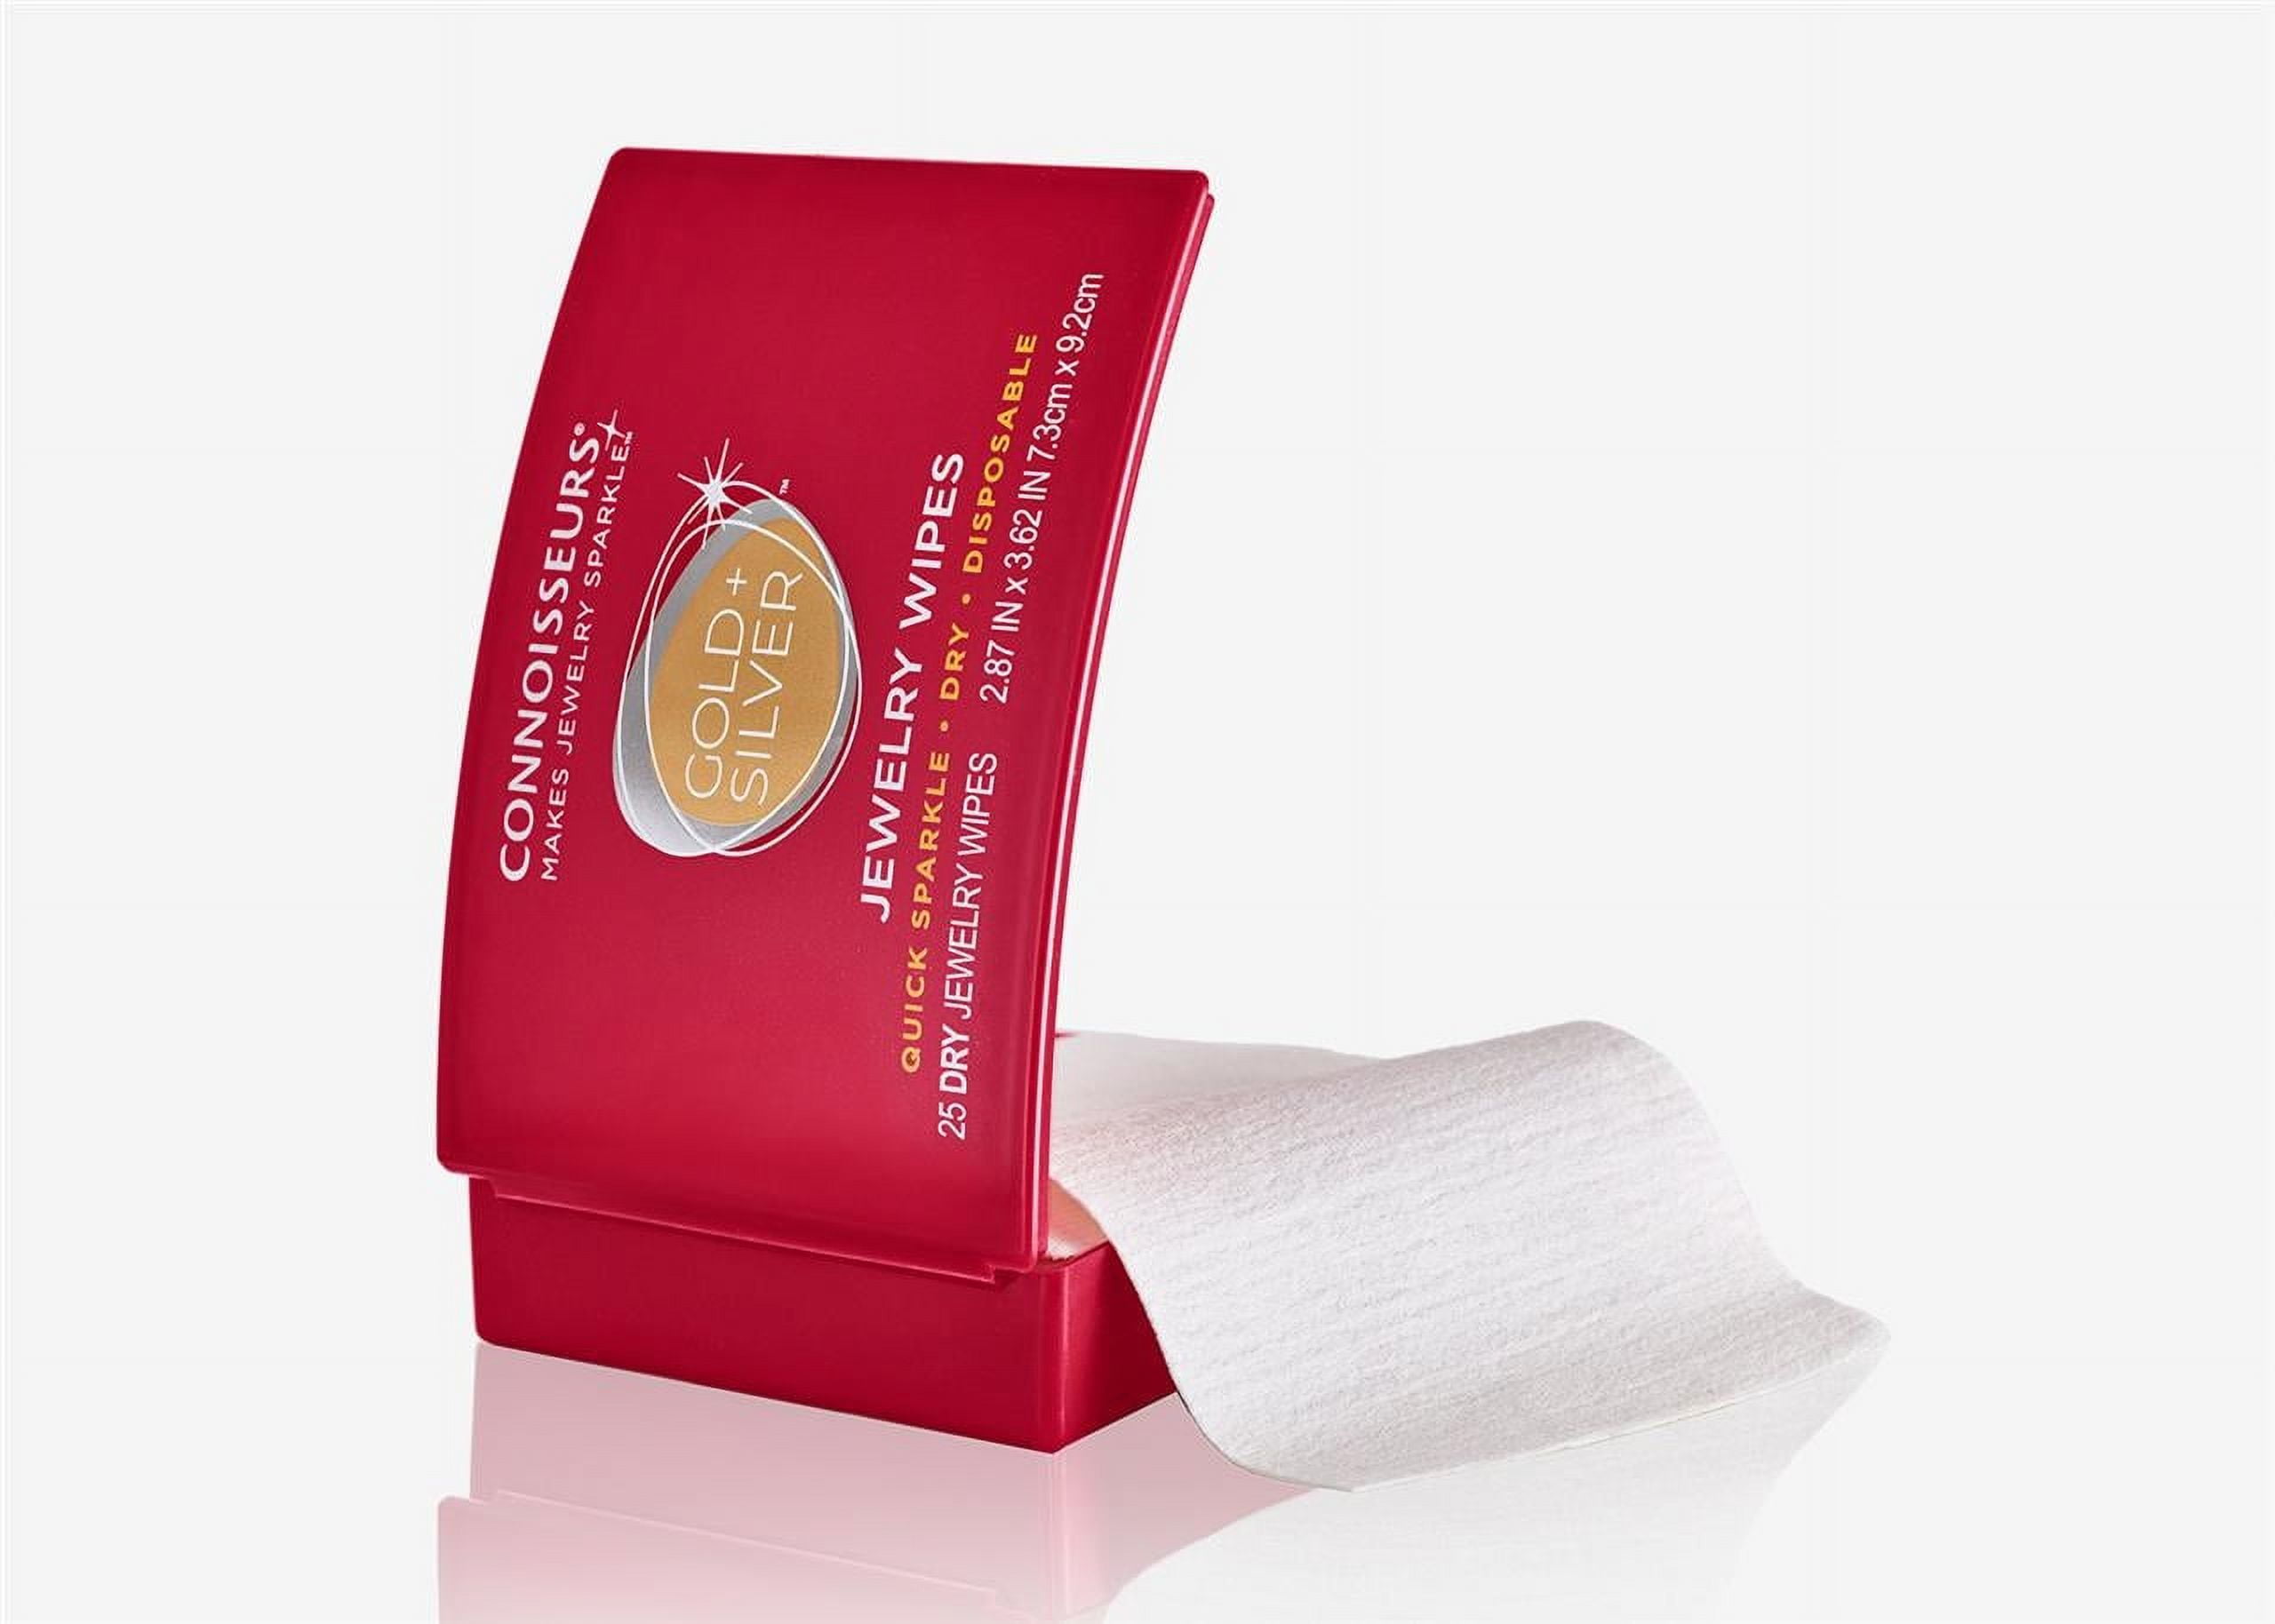 Connoisseurs Gold & Silver Jewelry Cleaning Wipes, Red Compact, 25ct Dry  Disposable Wipes Clean and Polish Gold and Silver Jewelry 